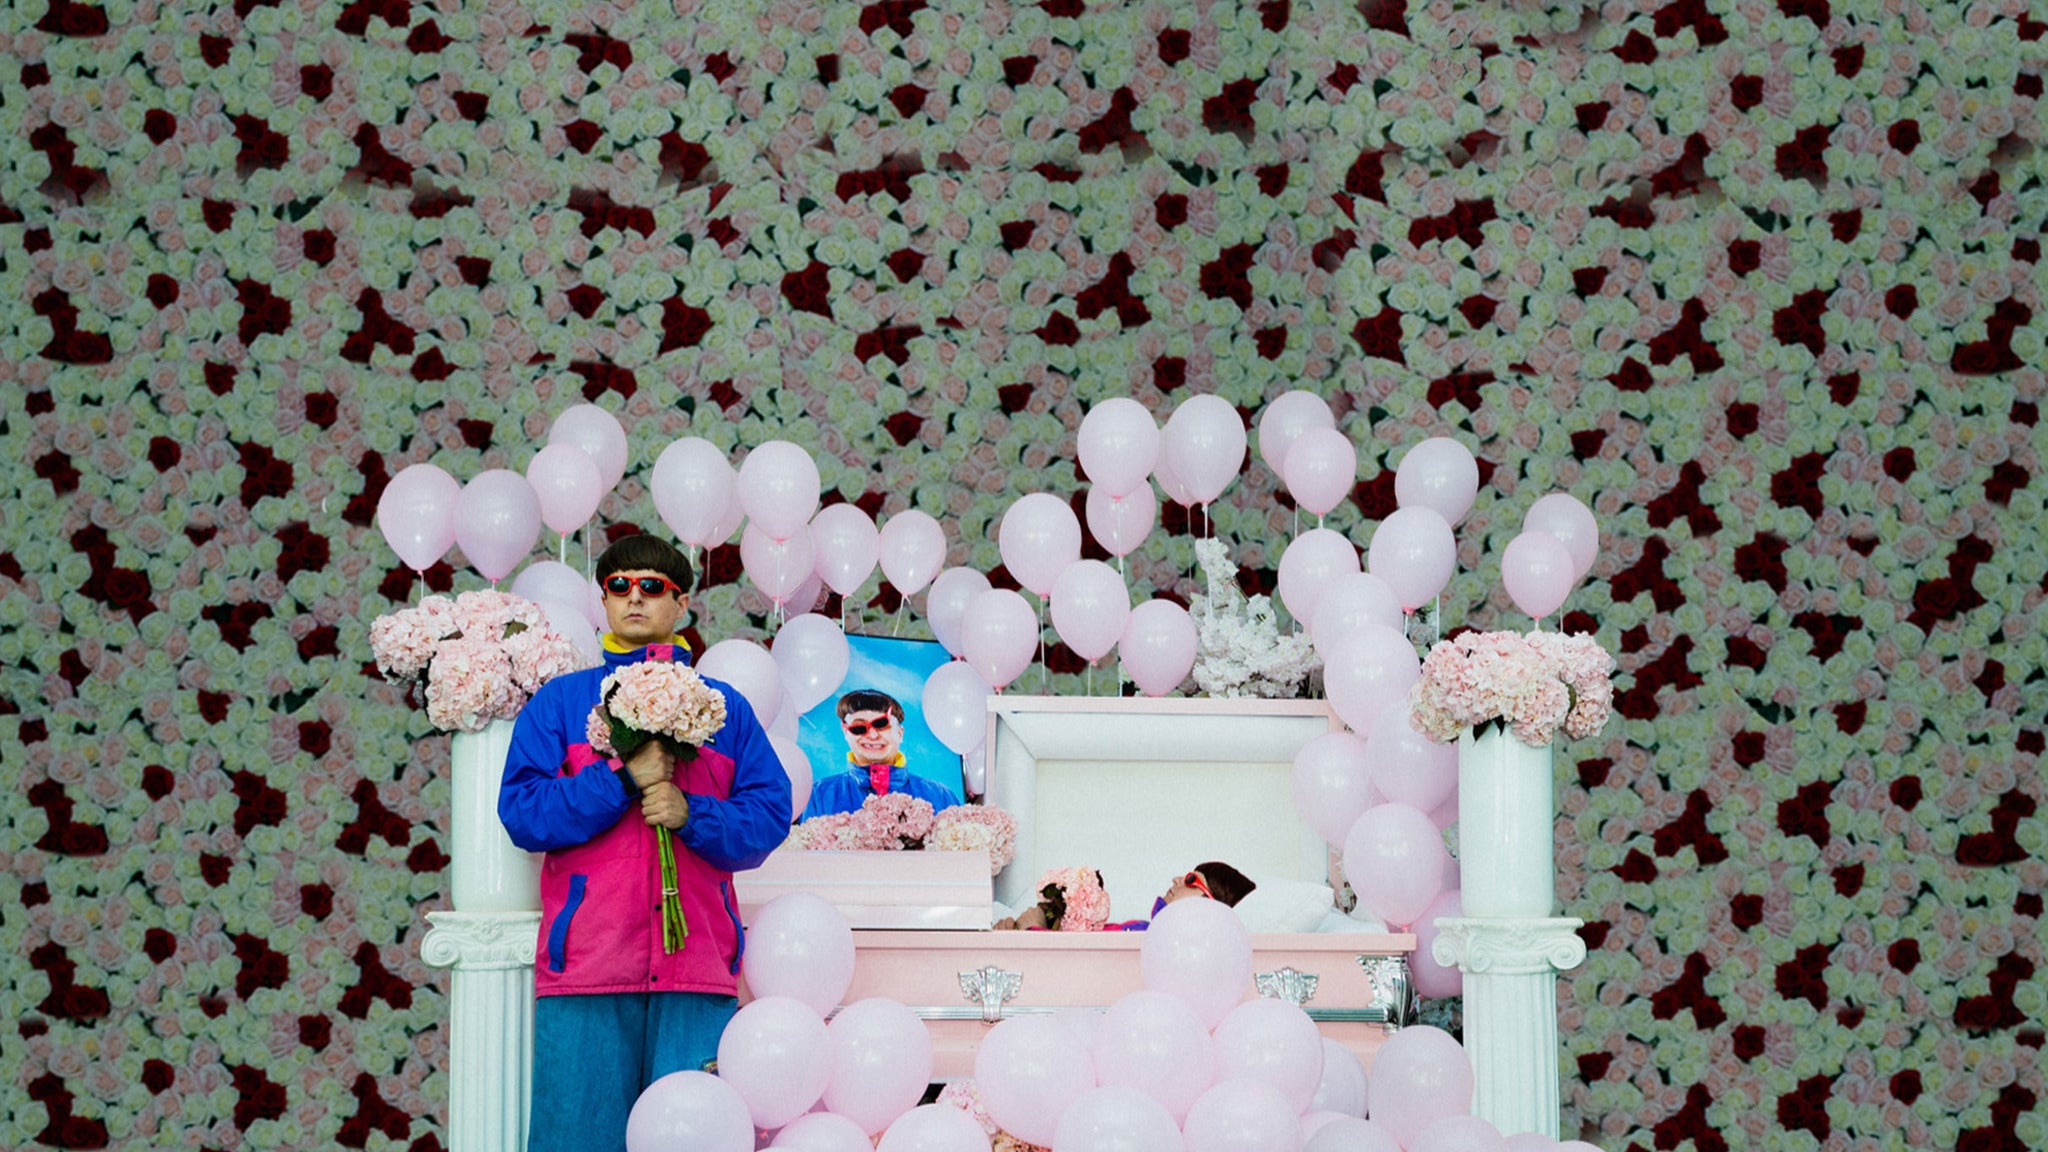 Oliver Tree in Milwaukee promo photo for Exclusive presale offer code